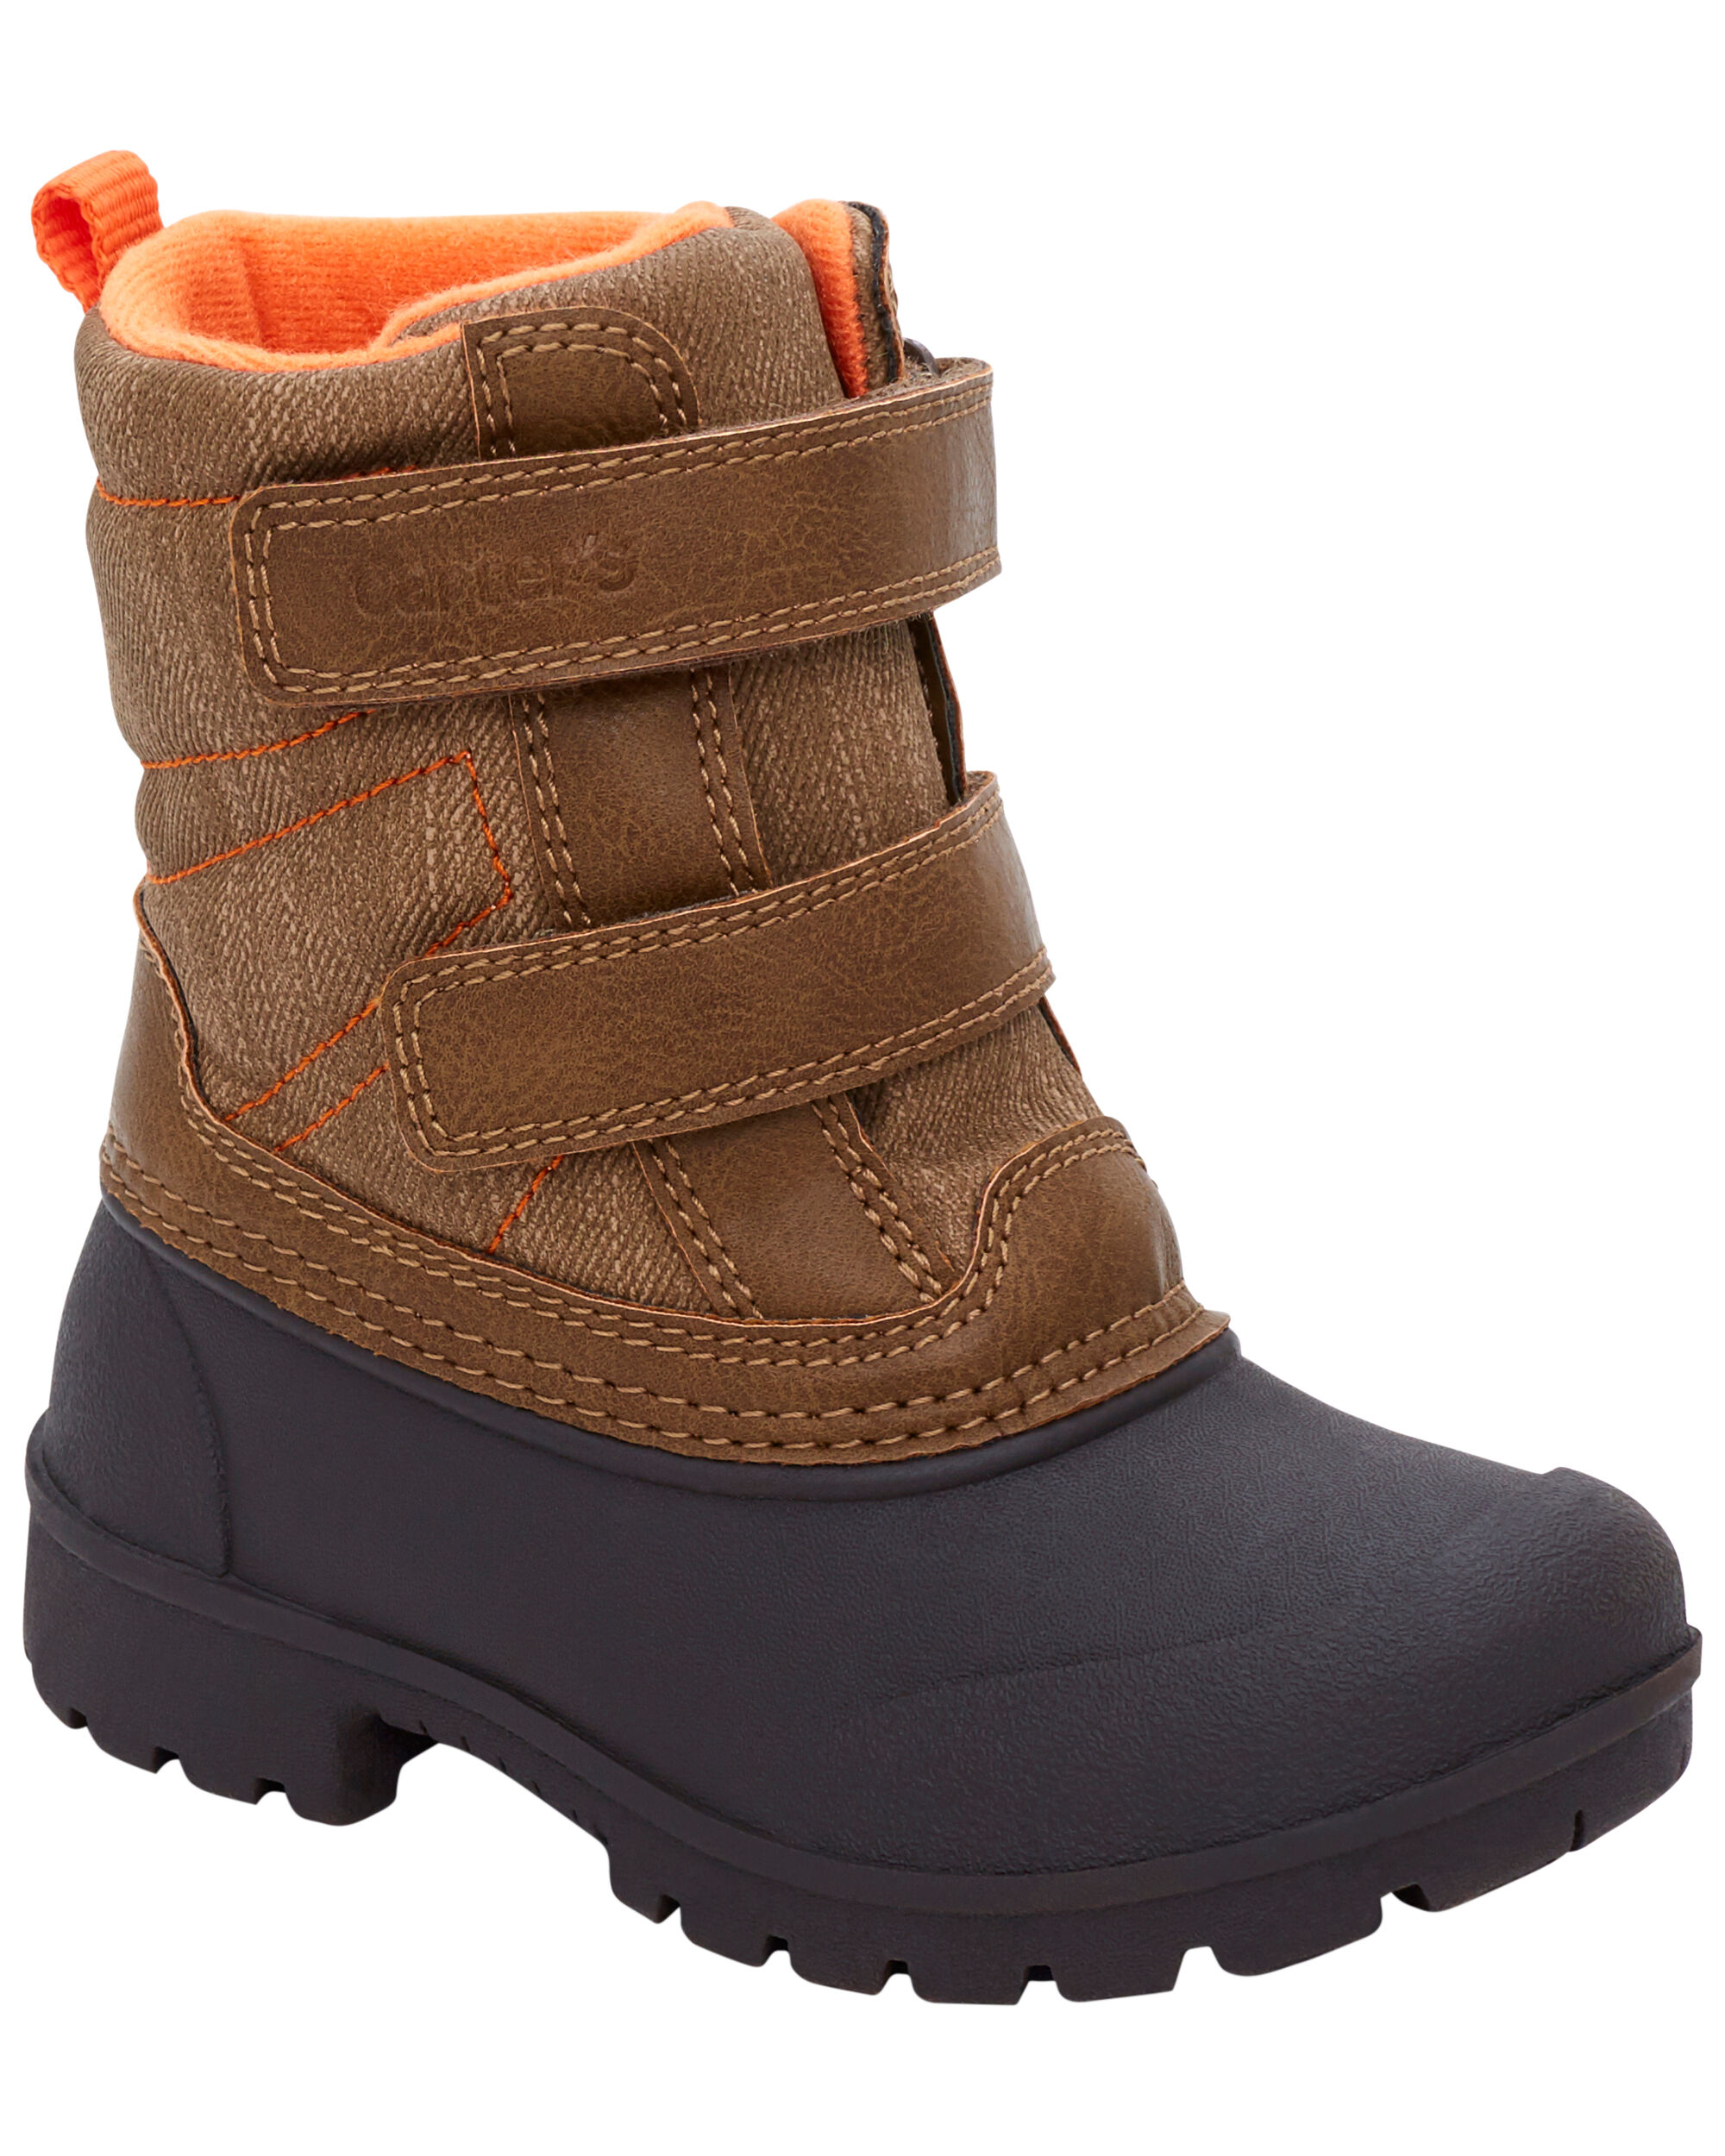 Boy Shoes (Sizes 13-3Y): Boots | Carter's | Free Shipping